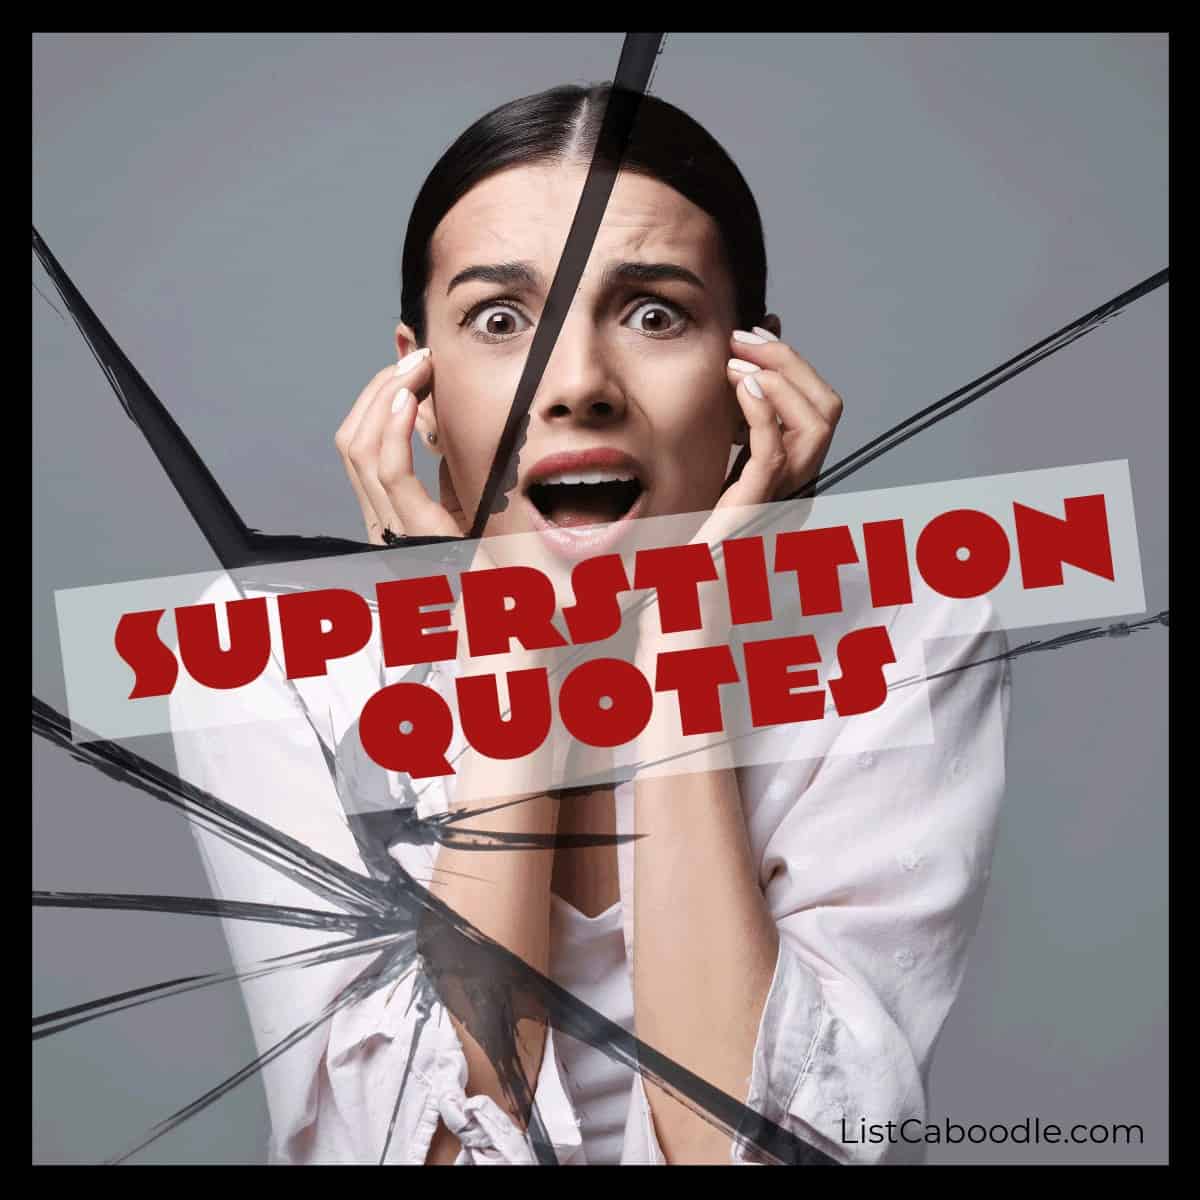 superstition quotes